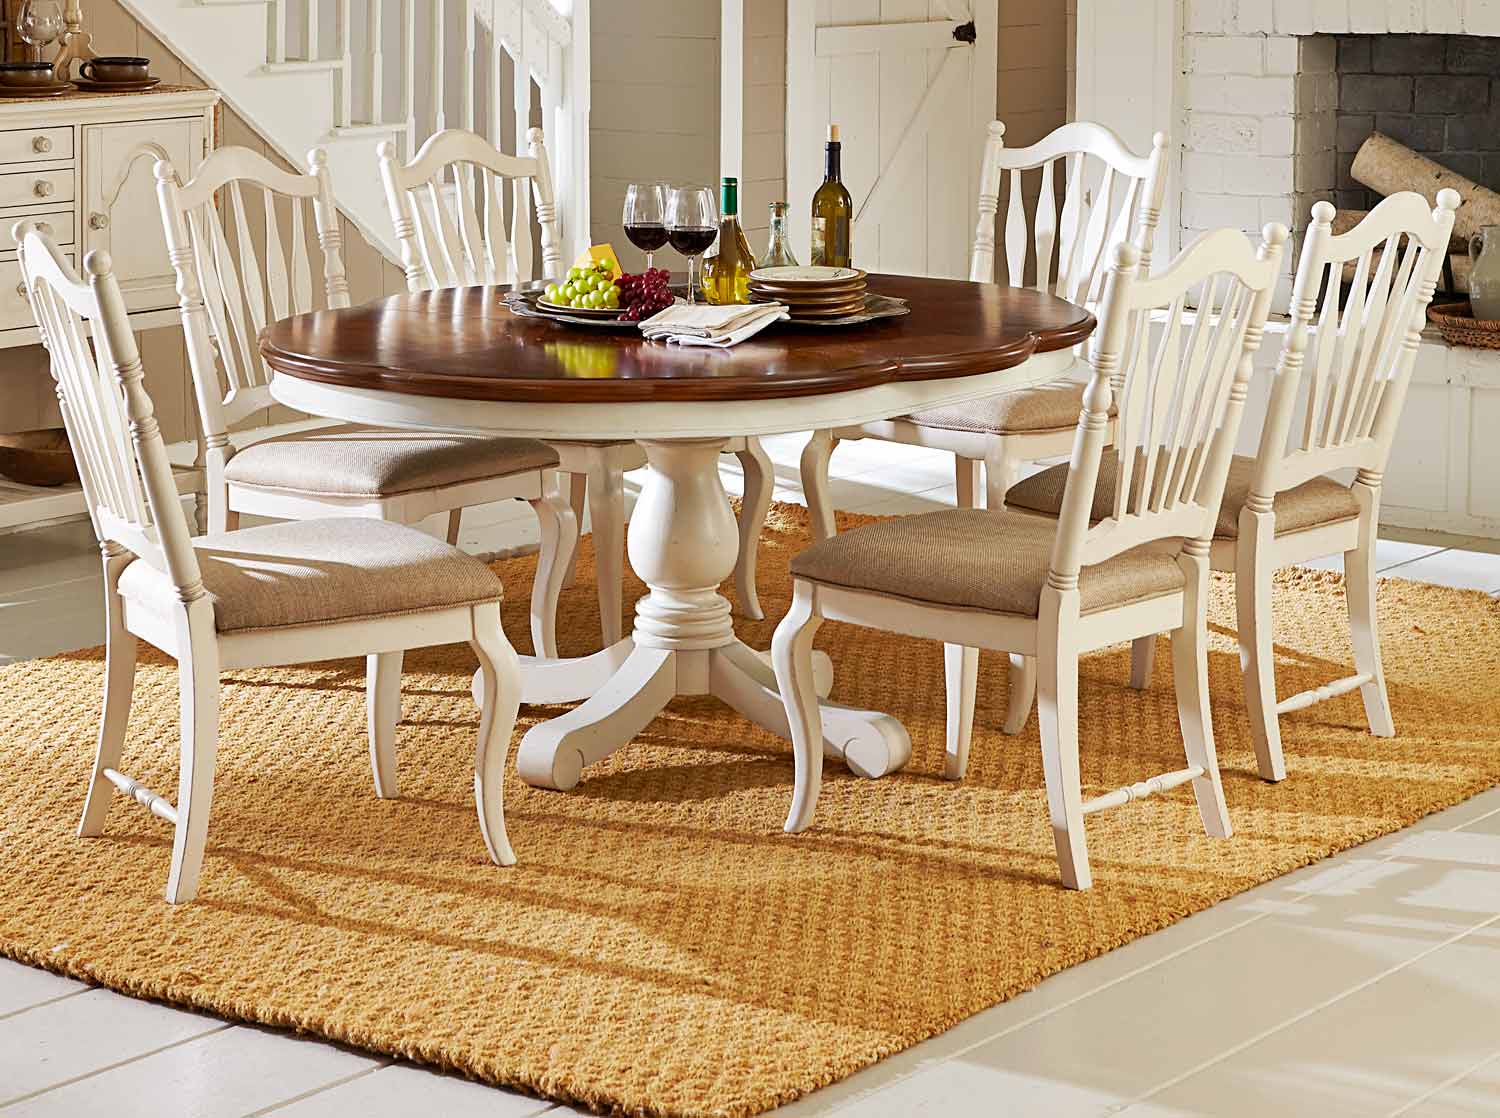 Legacy Classic Haven Dining Set with Pedestal Table - Buttercream White/Slight Distressing